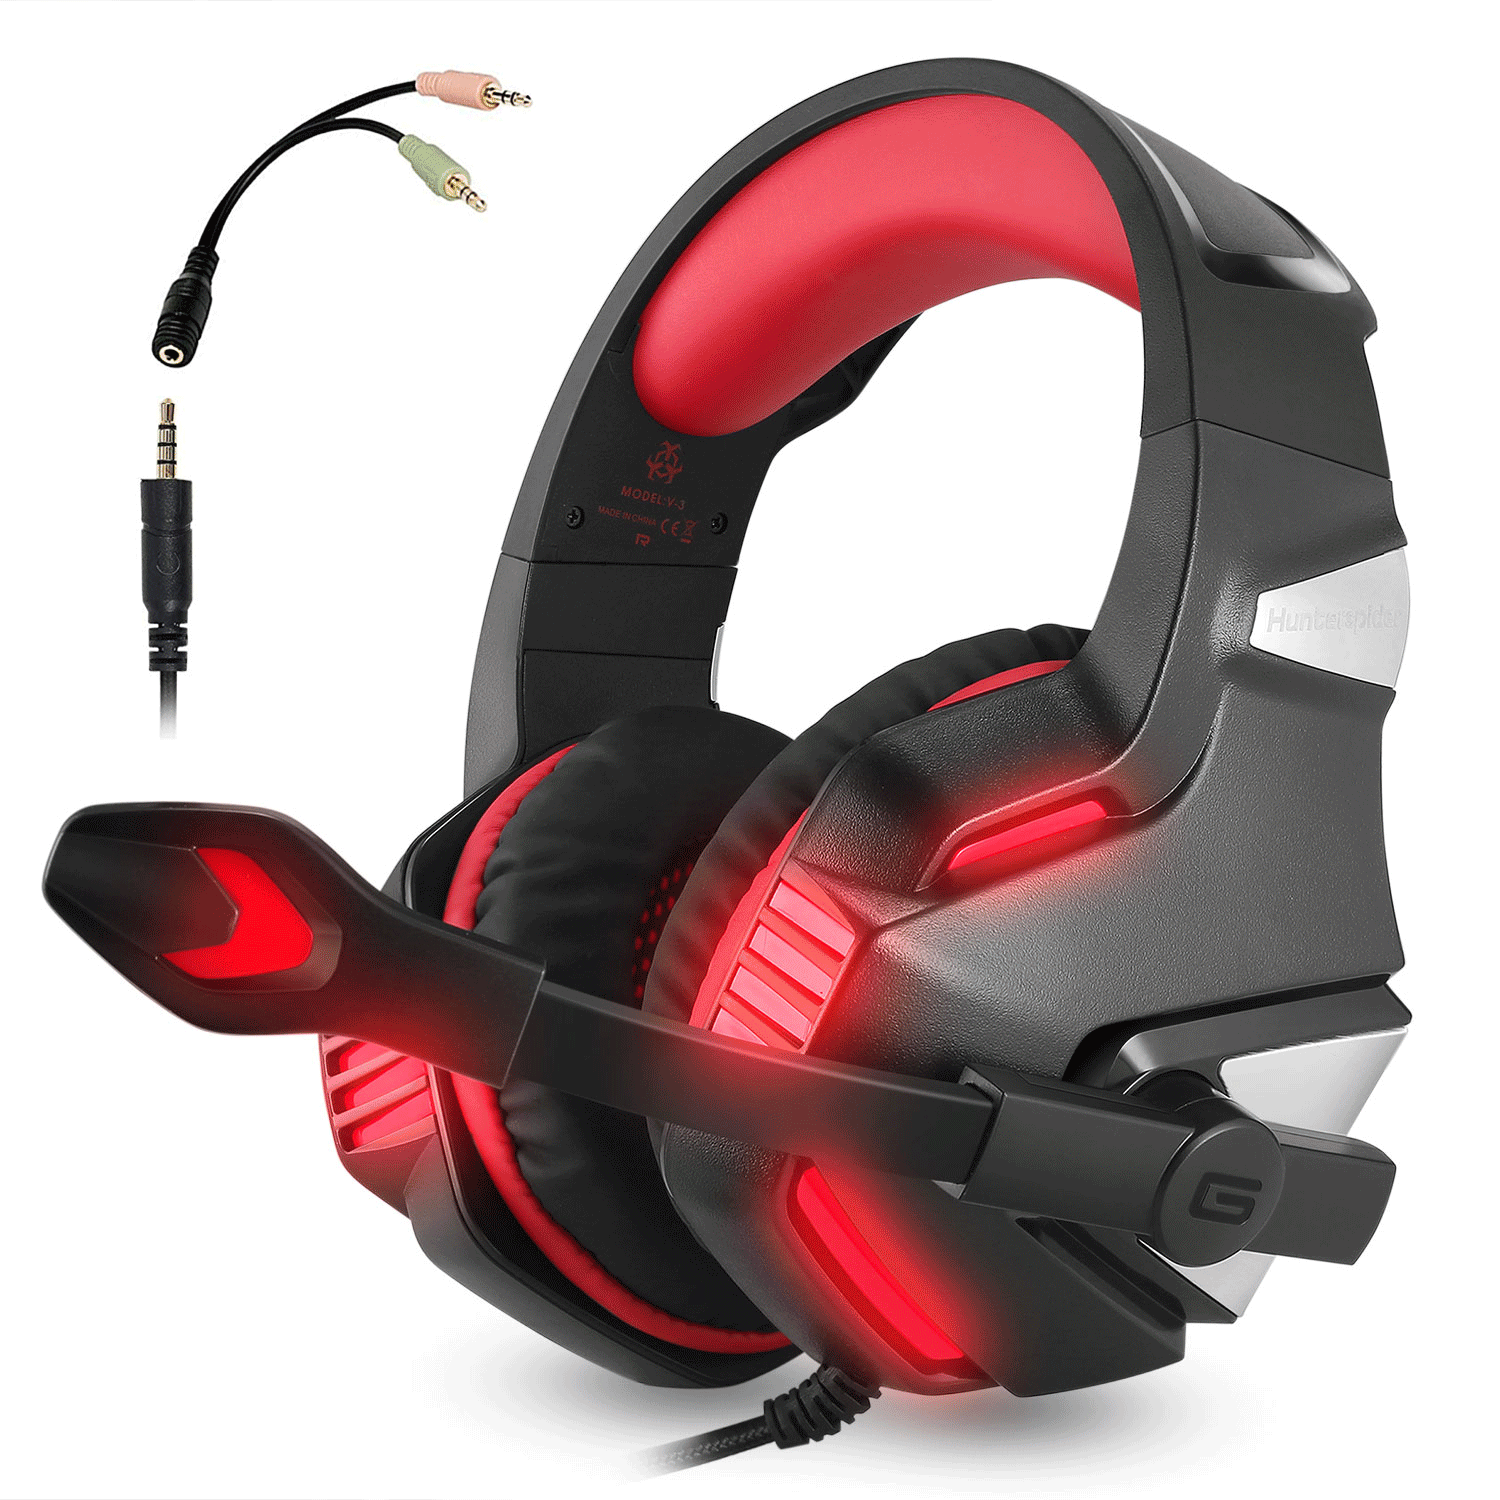 Good headsets for pc